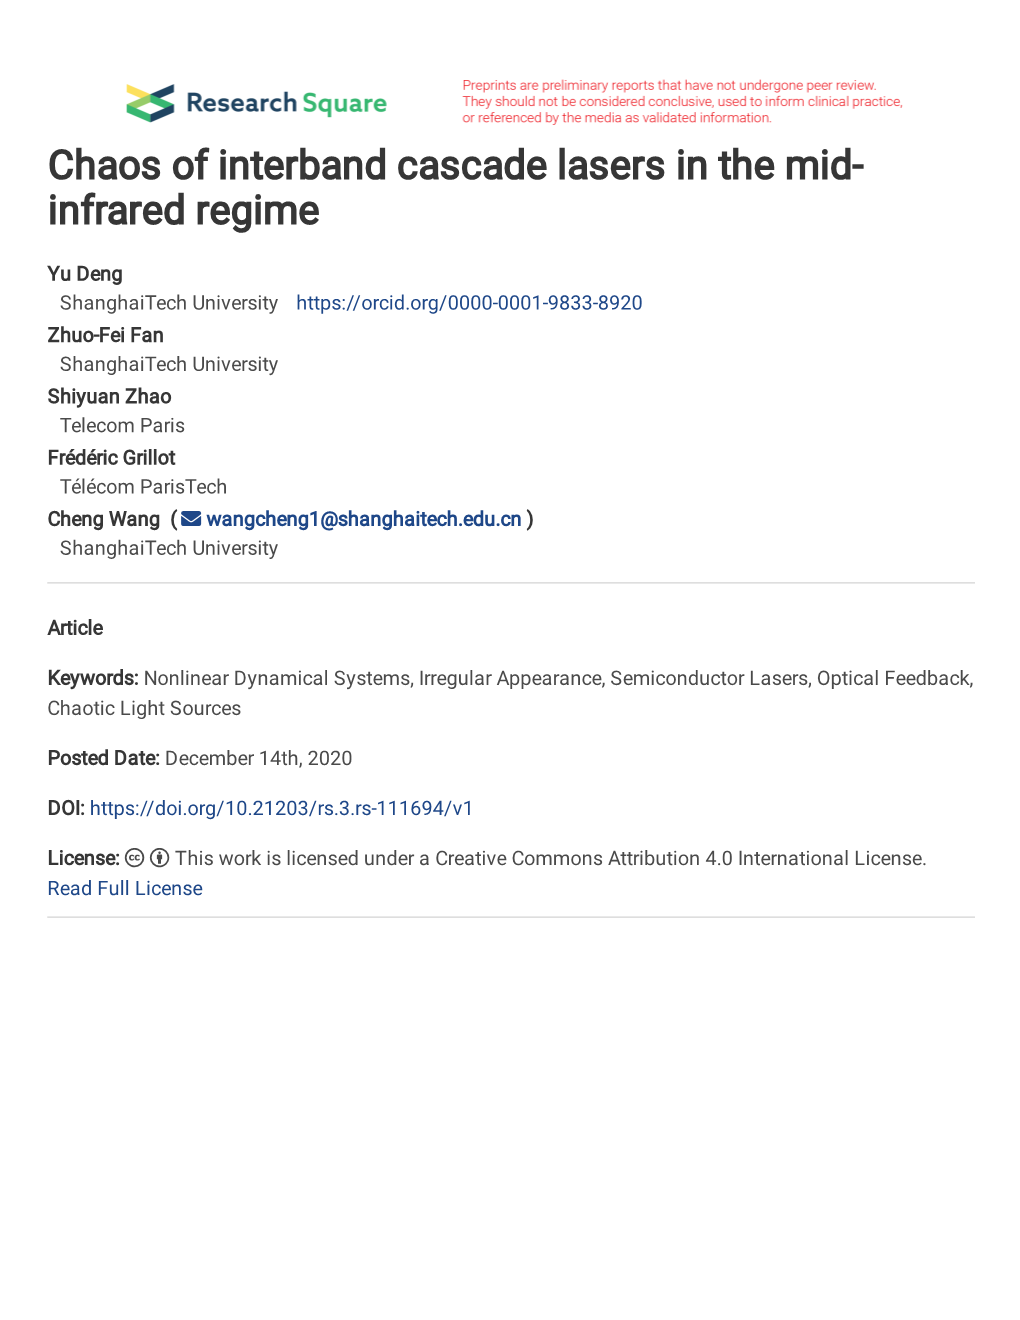 Chaos of Interband Cascade Lasers in the Mid-Infrared Regime